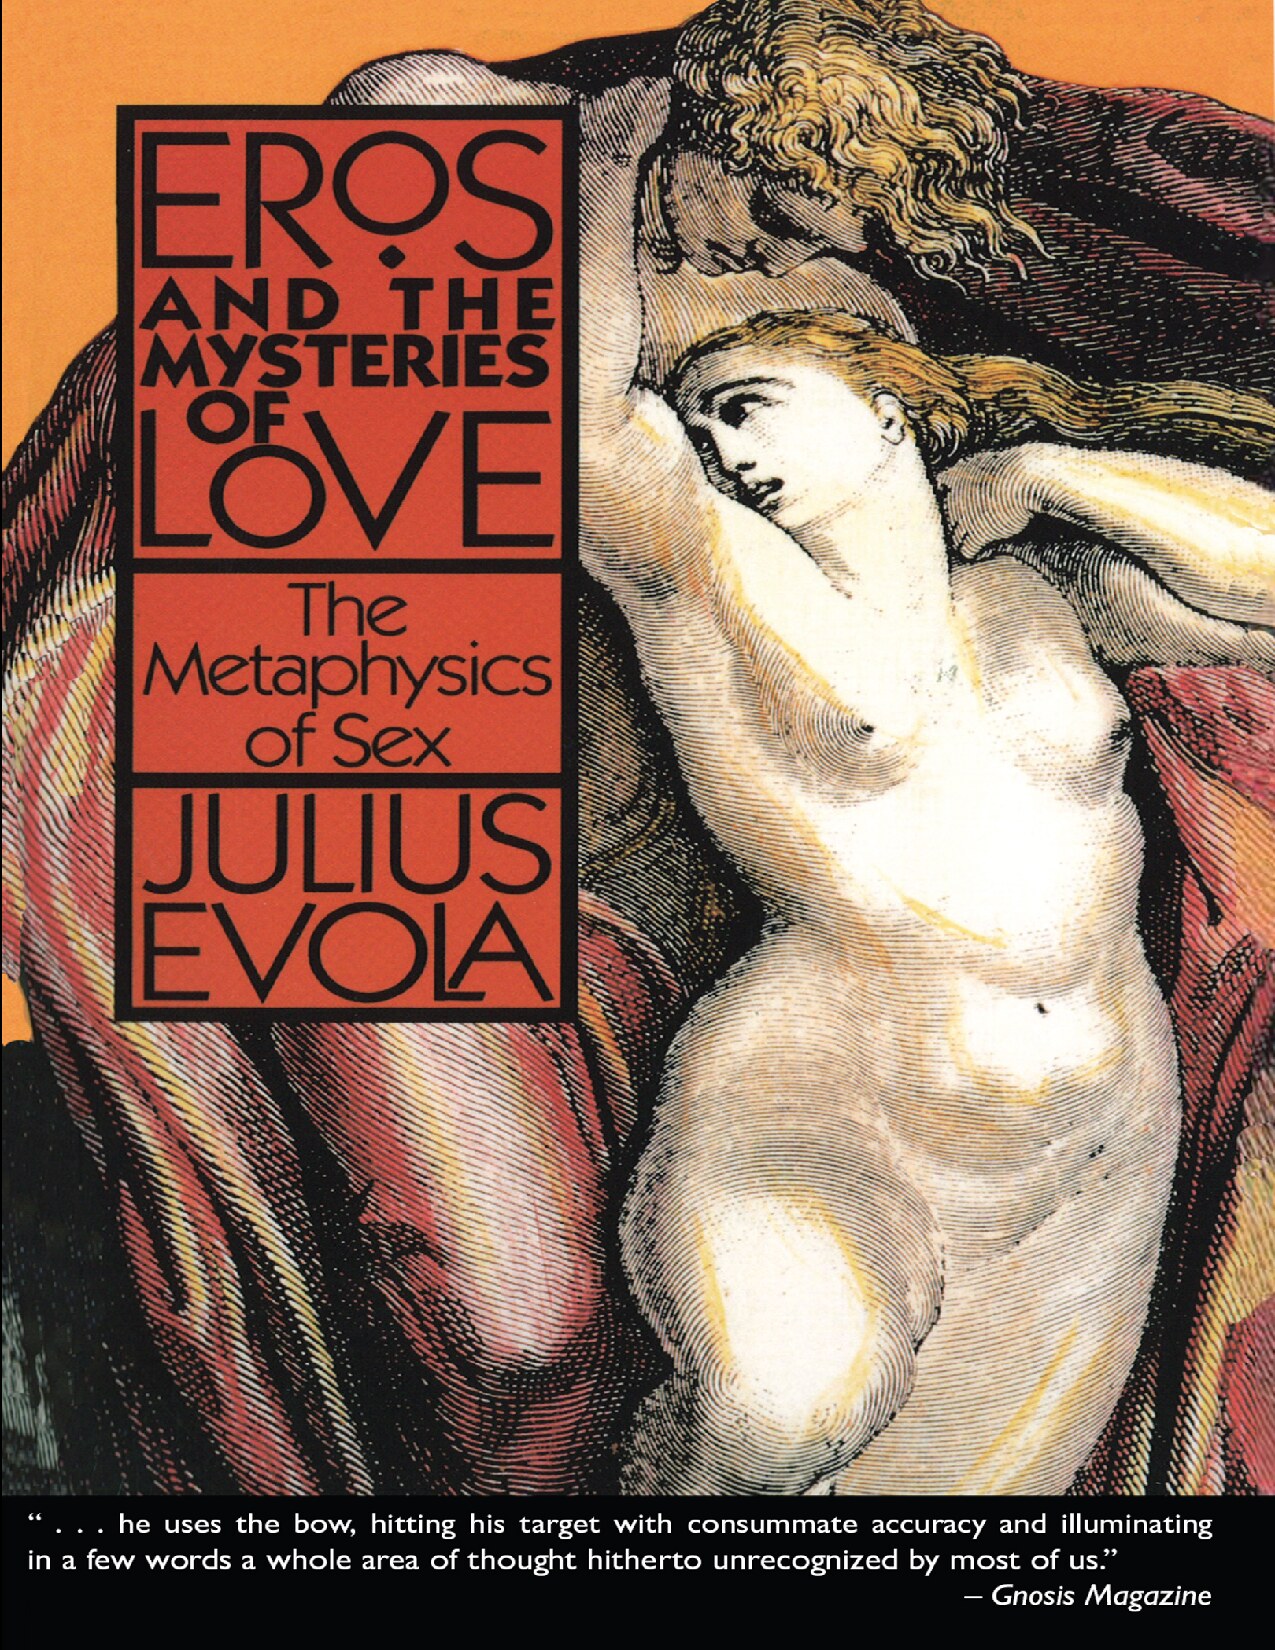 Eros and the Mysteries of Love